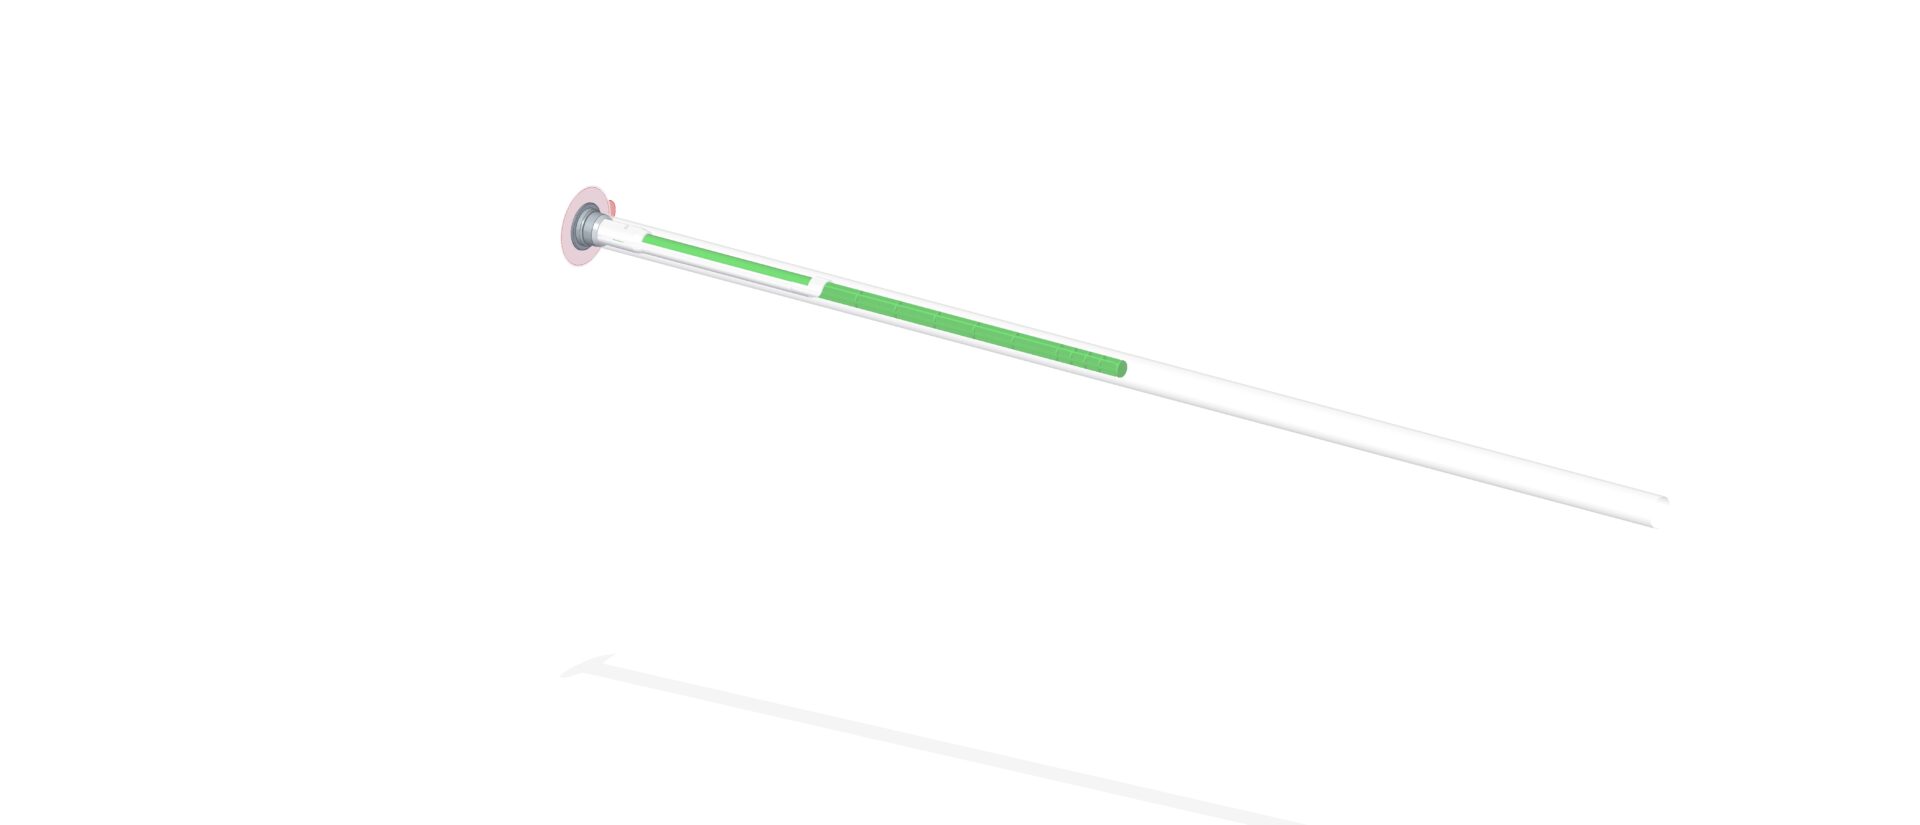 The HECHT Containment Sampling Stick, a sleek, patented pending device for high containment sampling of critical substances up to OEB Level 5, featuring a long lance with a green stripe, emphasizing its use in safe, efficient, and cross-contamination free collection of hazardous materials.